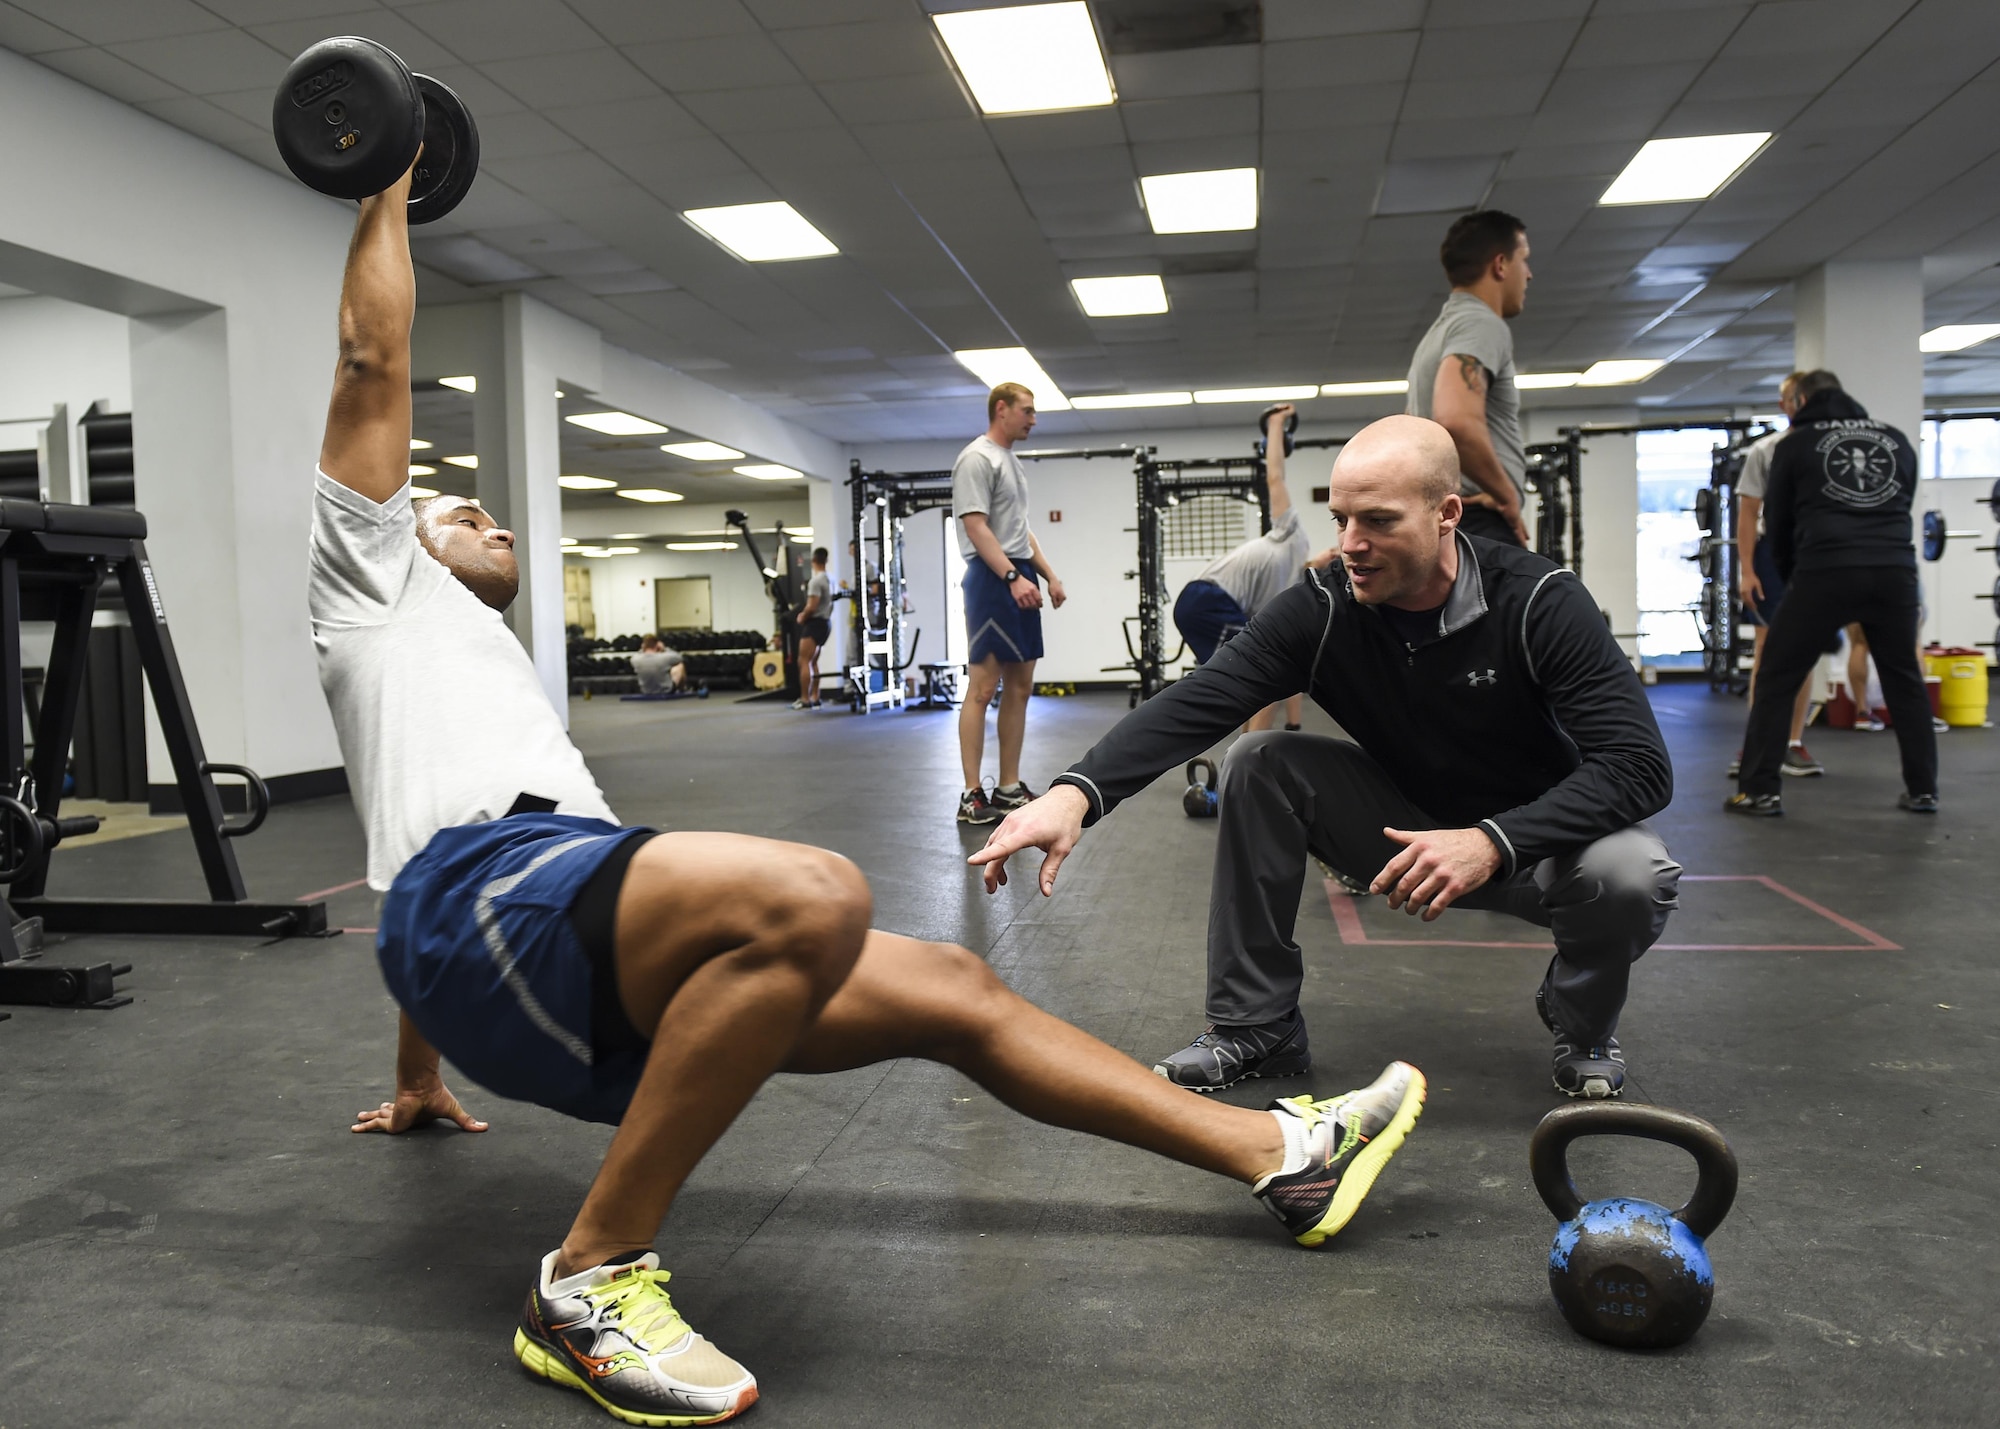 David Koch, an embedded athletic trainer with the 59th Medical Wing’s VIPER Clinic, teaches Senior Airman Christopher Rodriguez, a student from the 342nd Training Squadron, proper lifting techniques, Jan. 27, 2016, at the Battle Gym on Joint Base San Antonio-Lackland, Texas. Four athletic trainers are working with students at the 342nd and 343rd Training Squadrons to determine the effectiveness of embedding athletic trainers into military physical training programs. If successful, the initiative could potentially reshape how injured trainees receive care. (U.S. Air Force photo/Staff Sgt. Michael Ellis)